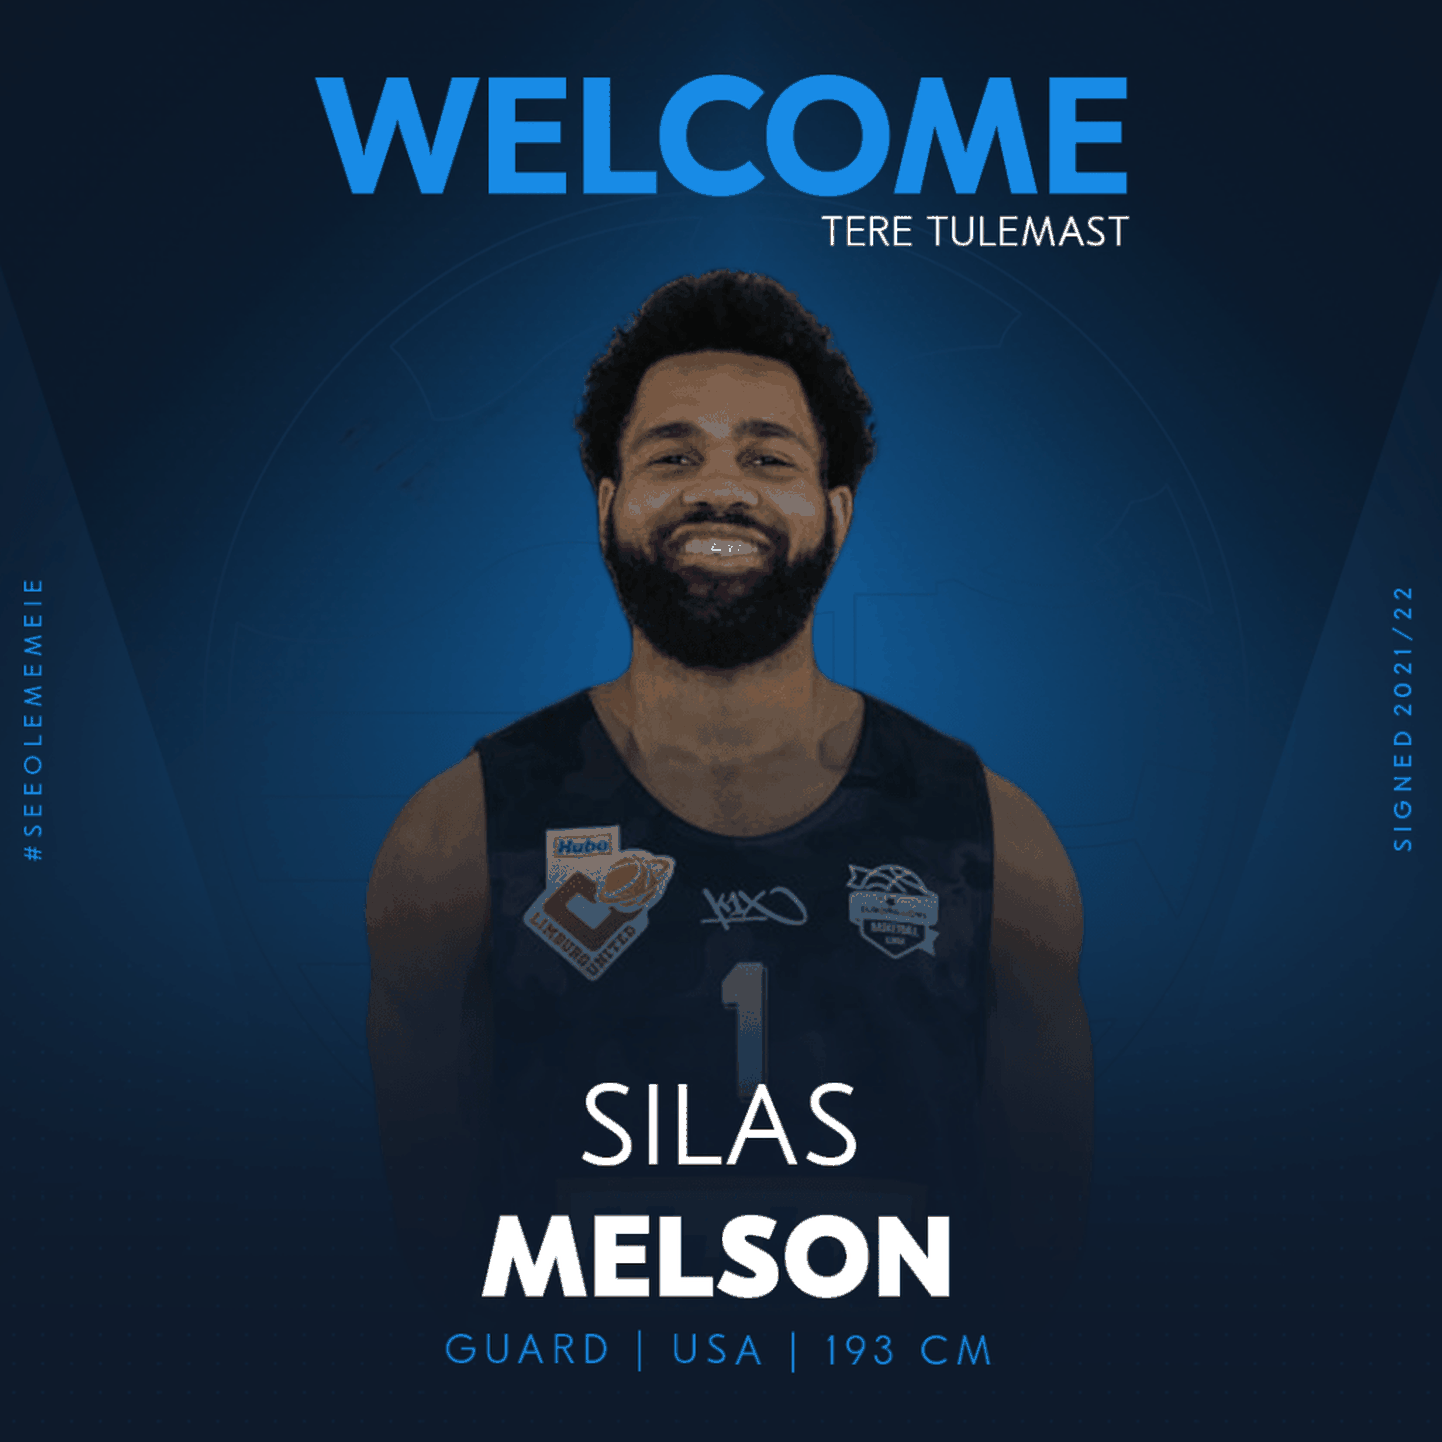 Silas Melson.